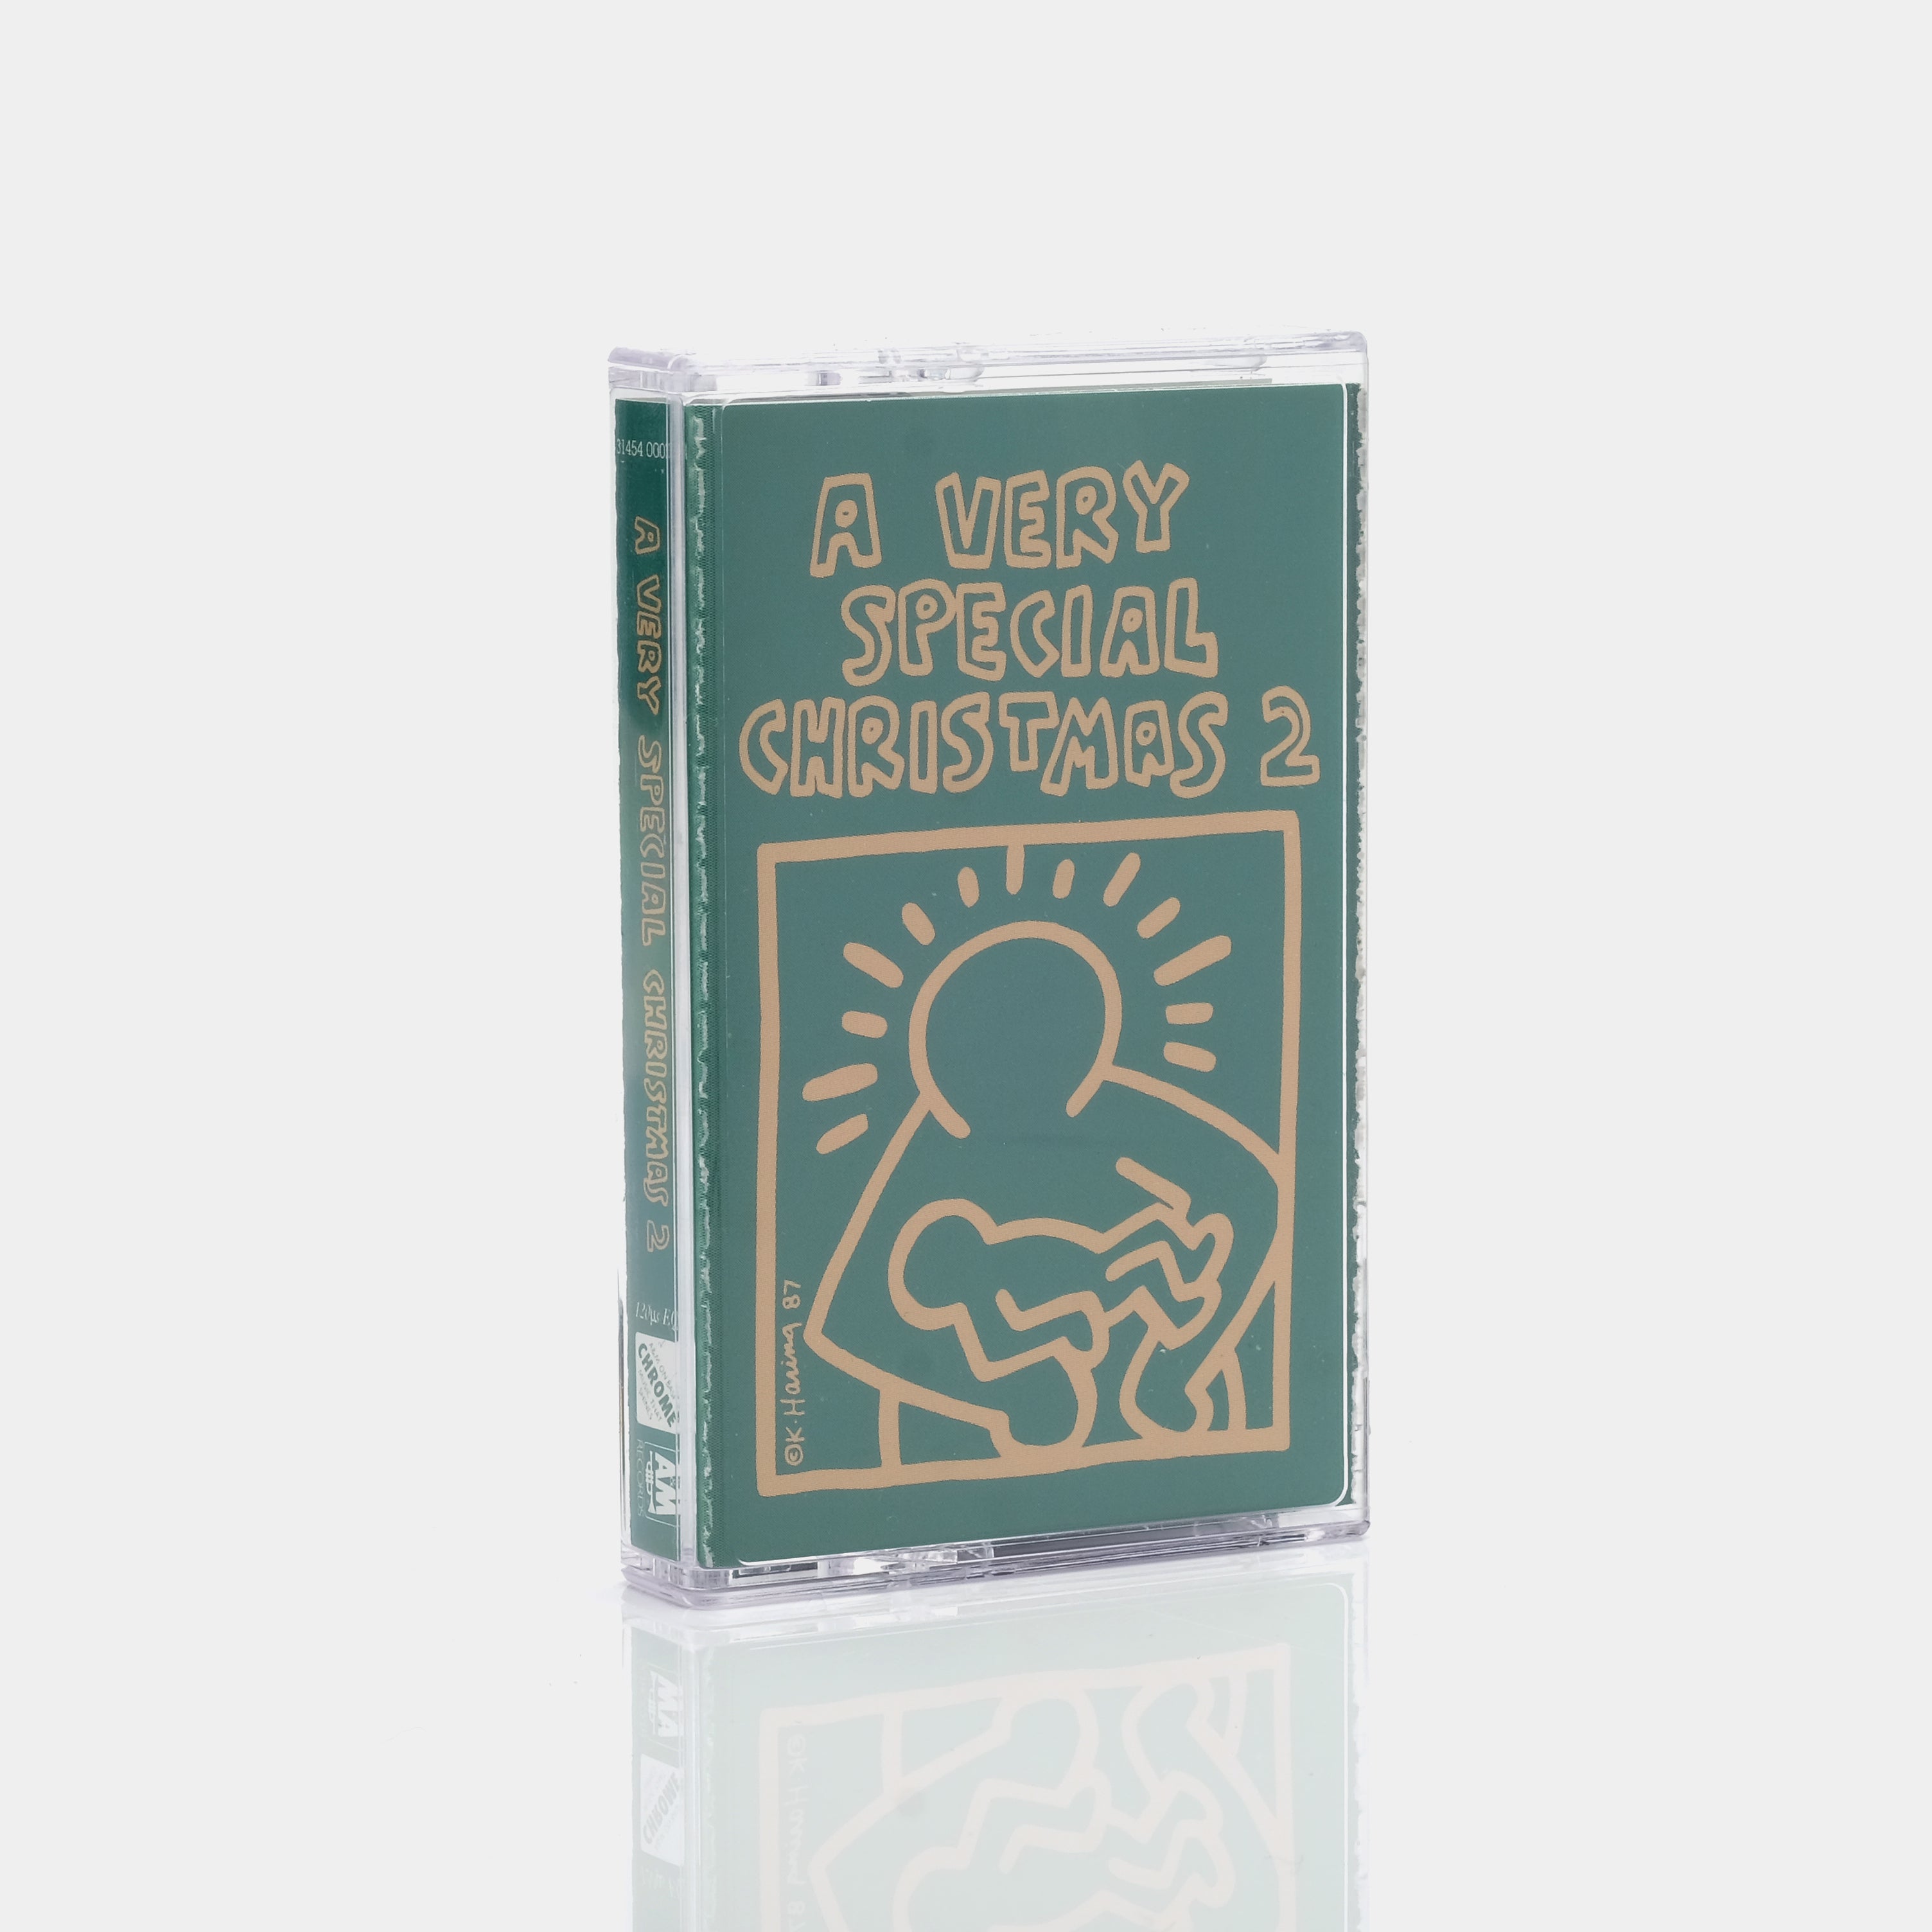 A Very Special Christmas 2 Cassette Tape